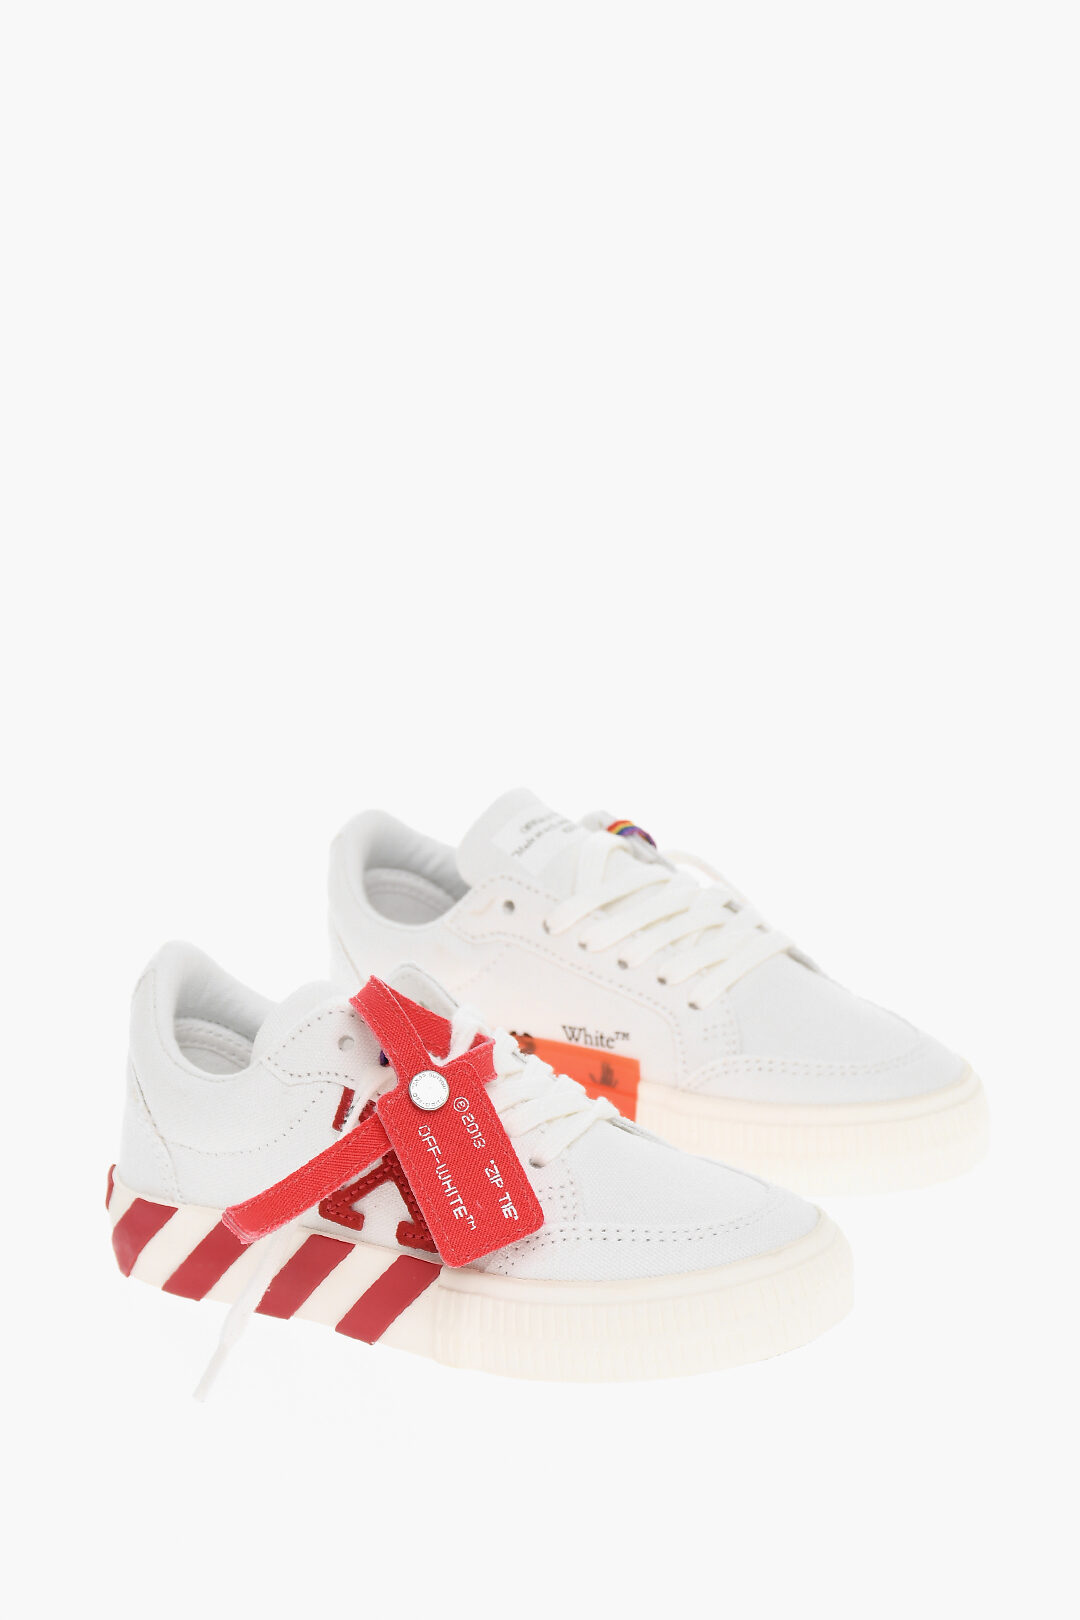 3.0 OFF COURT LEATHER in white | Off-White™ Official DE